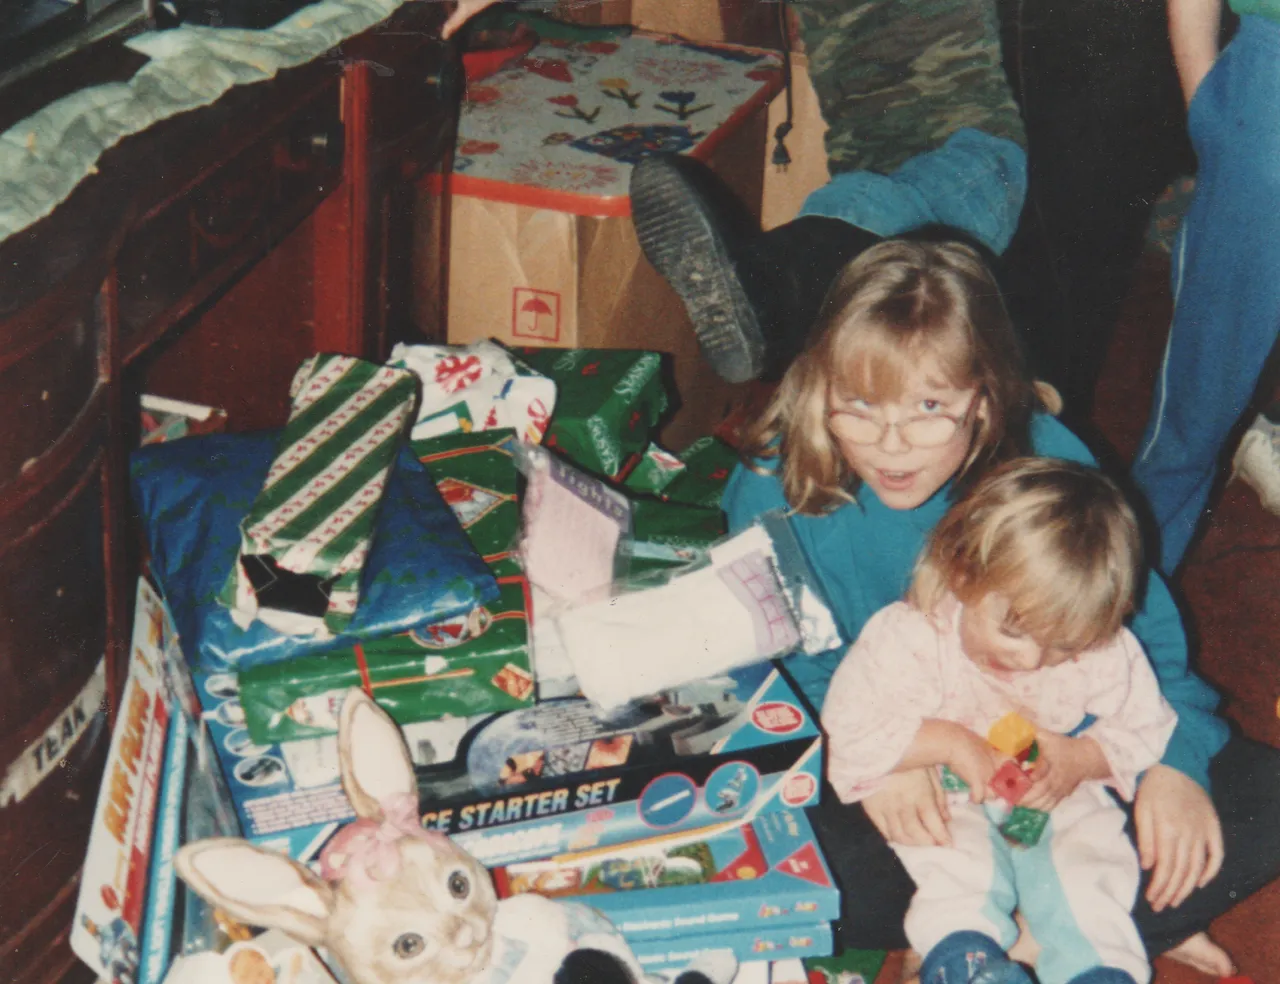 1991-12-25 - Christmas of 1991 - Joey, Crystal, Katie, Presents, Piano, Toys, 3pics-2.png